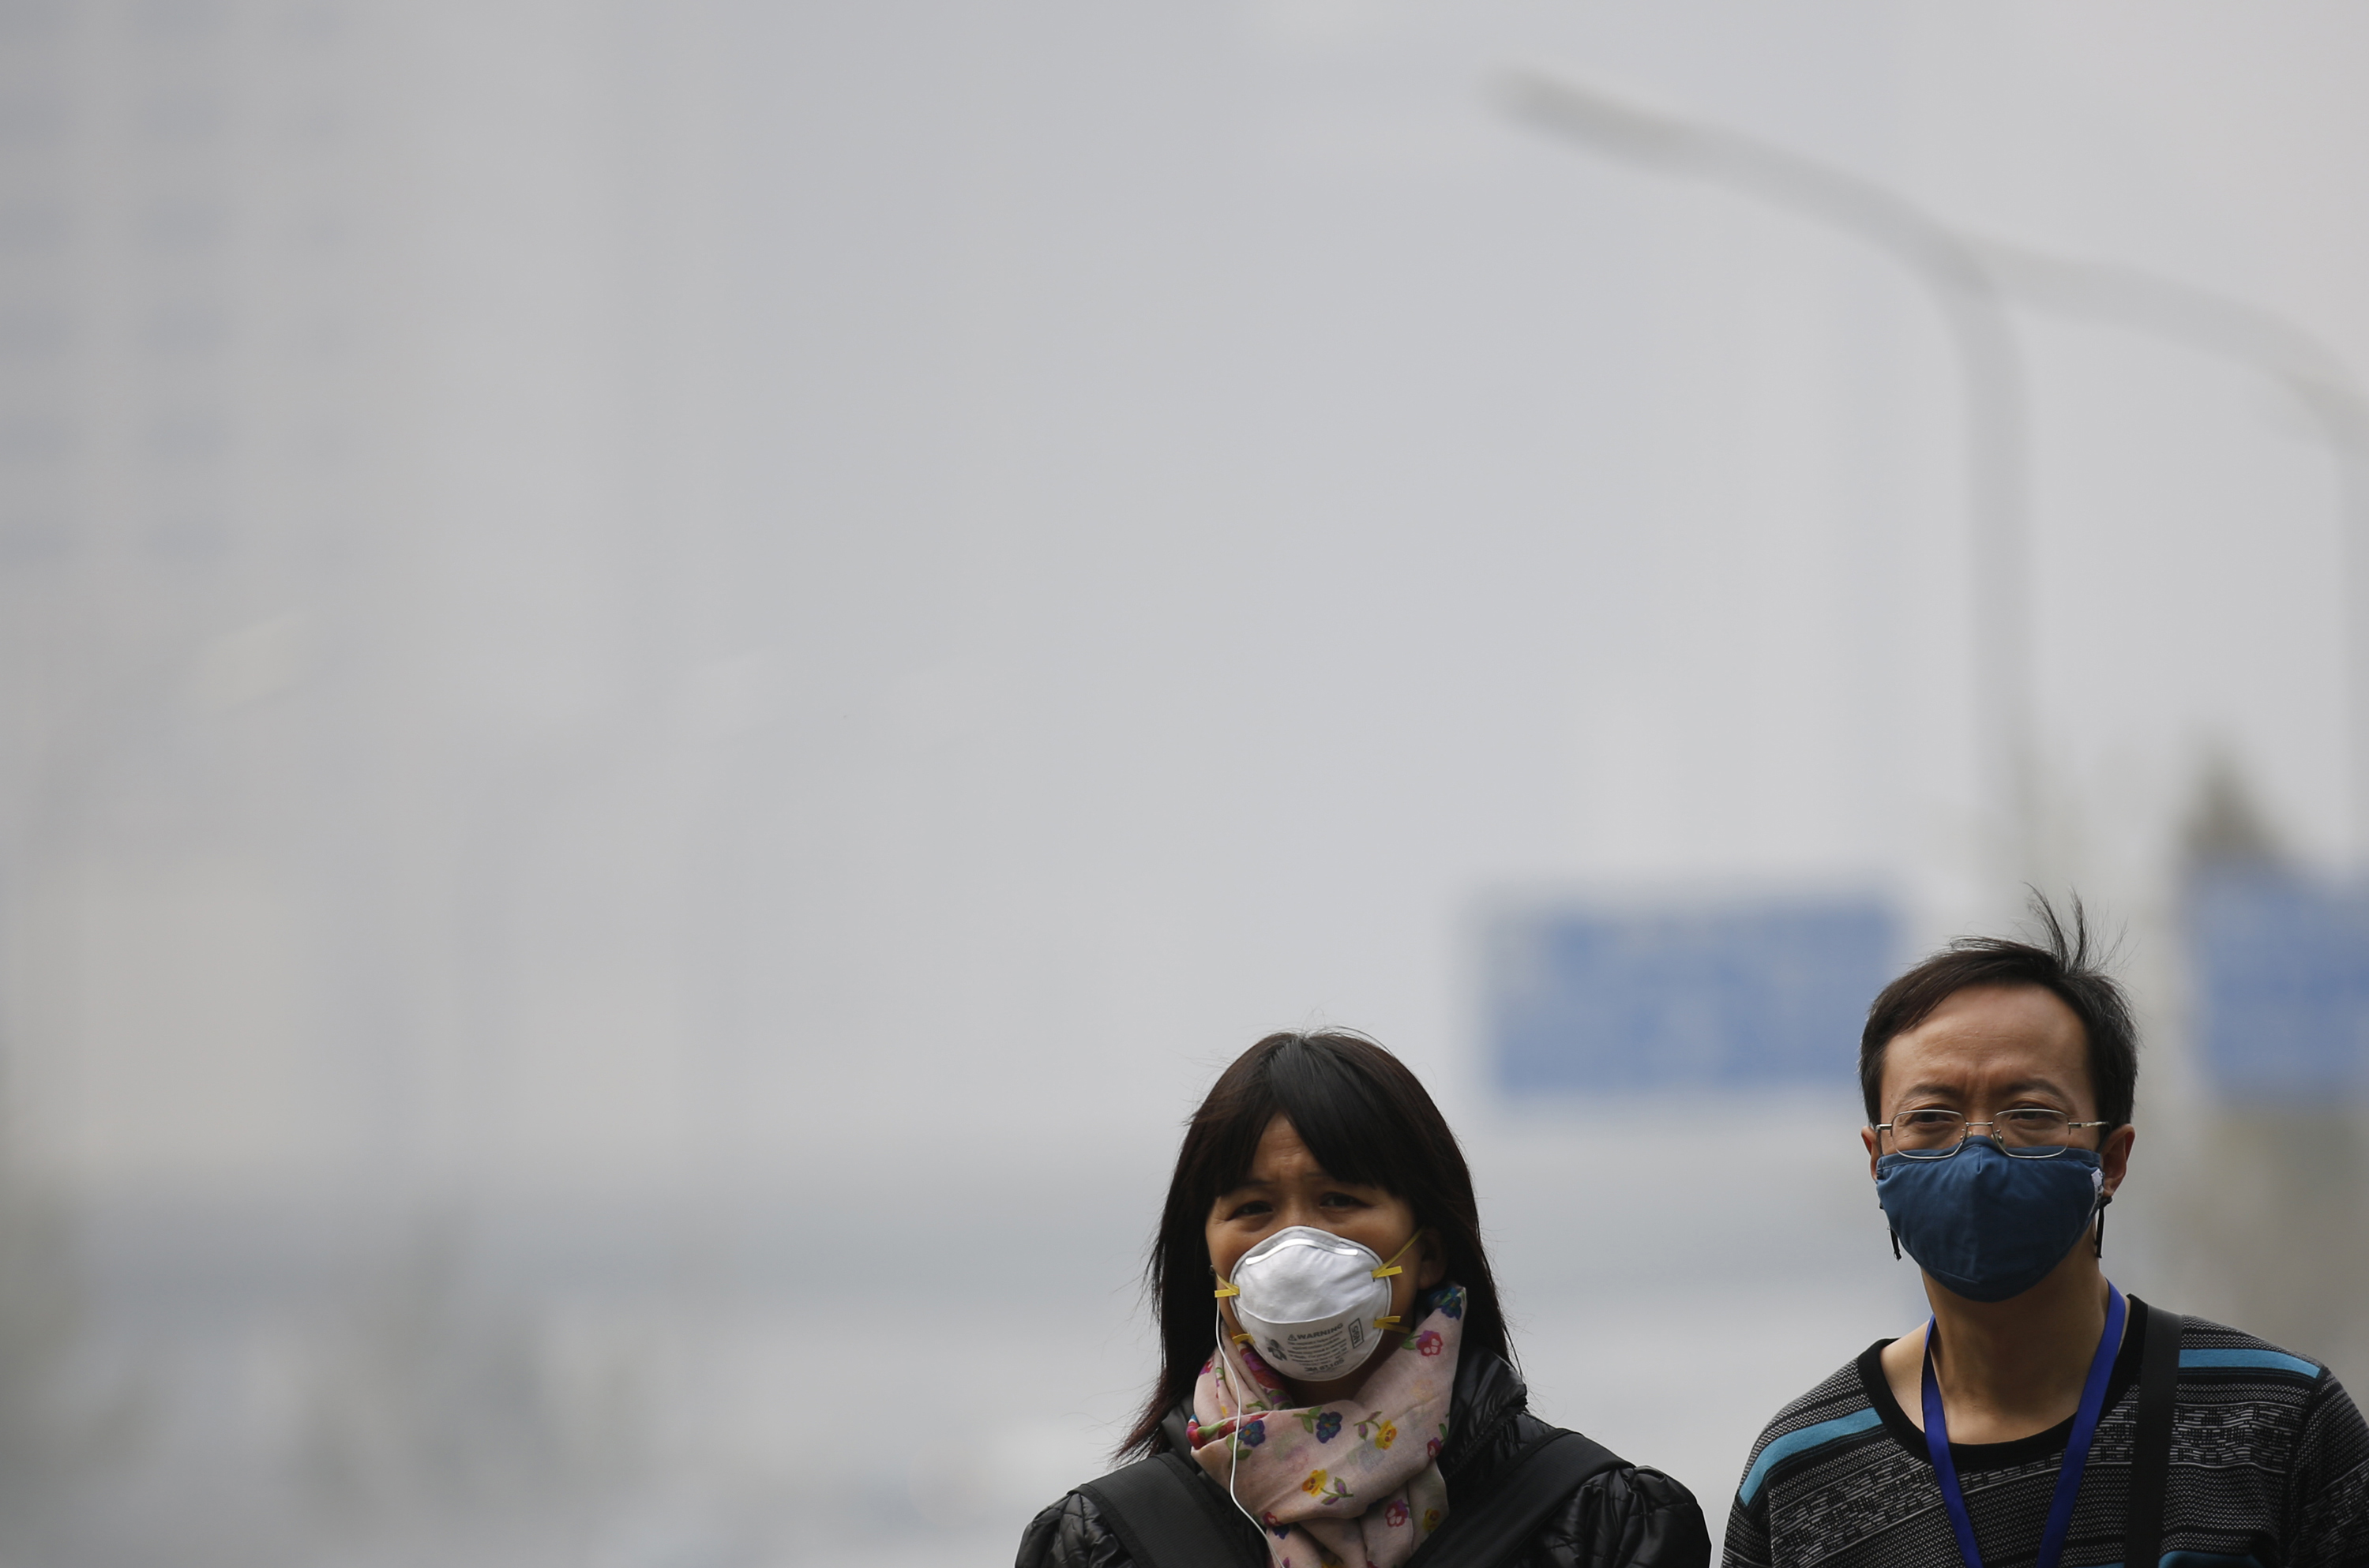 People wearing masks walk on a street amid heavy haze and smog in Beijing on Oct. 11, 2014 (Kim Kyung Hoon—Reuters)